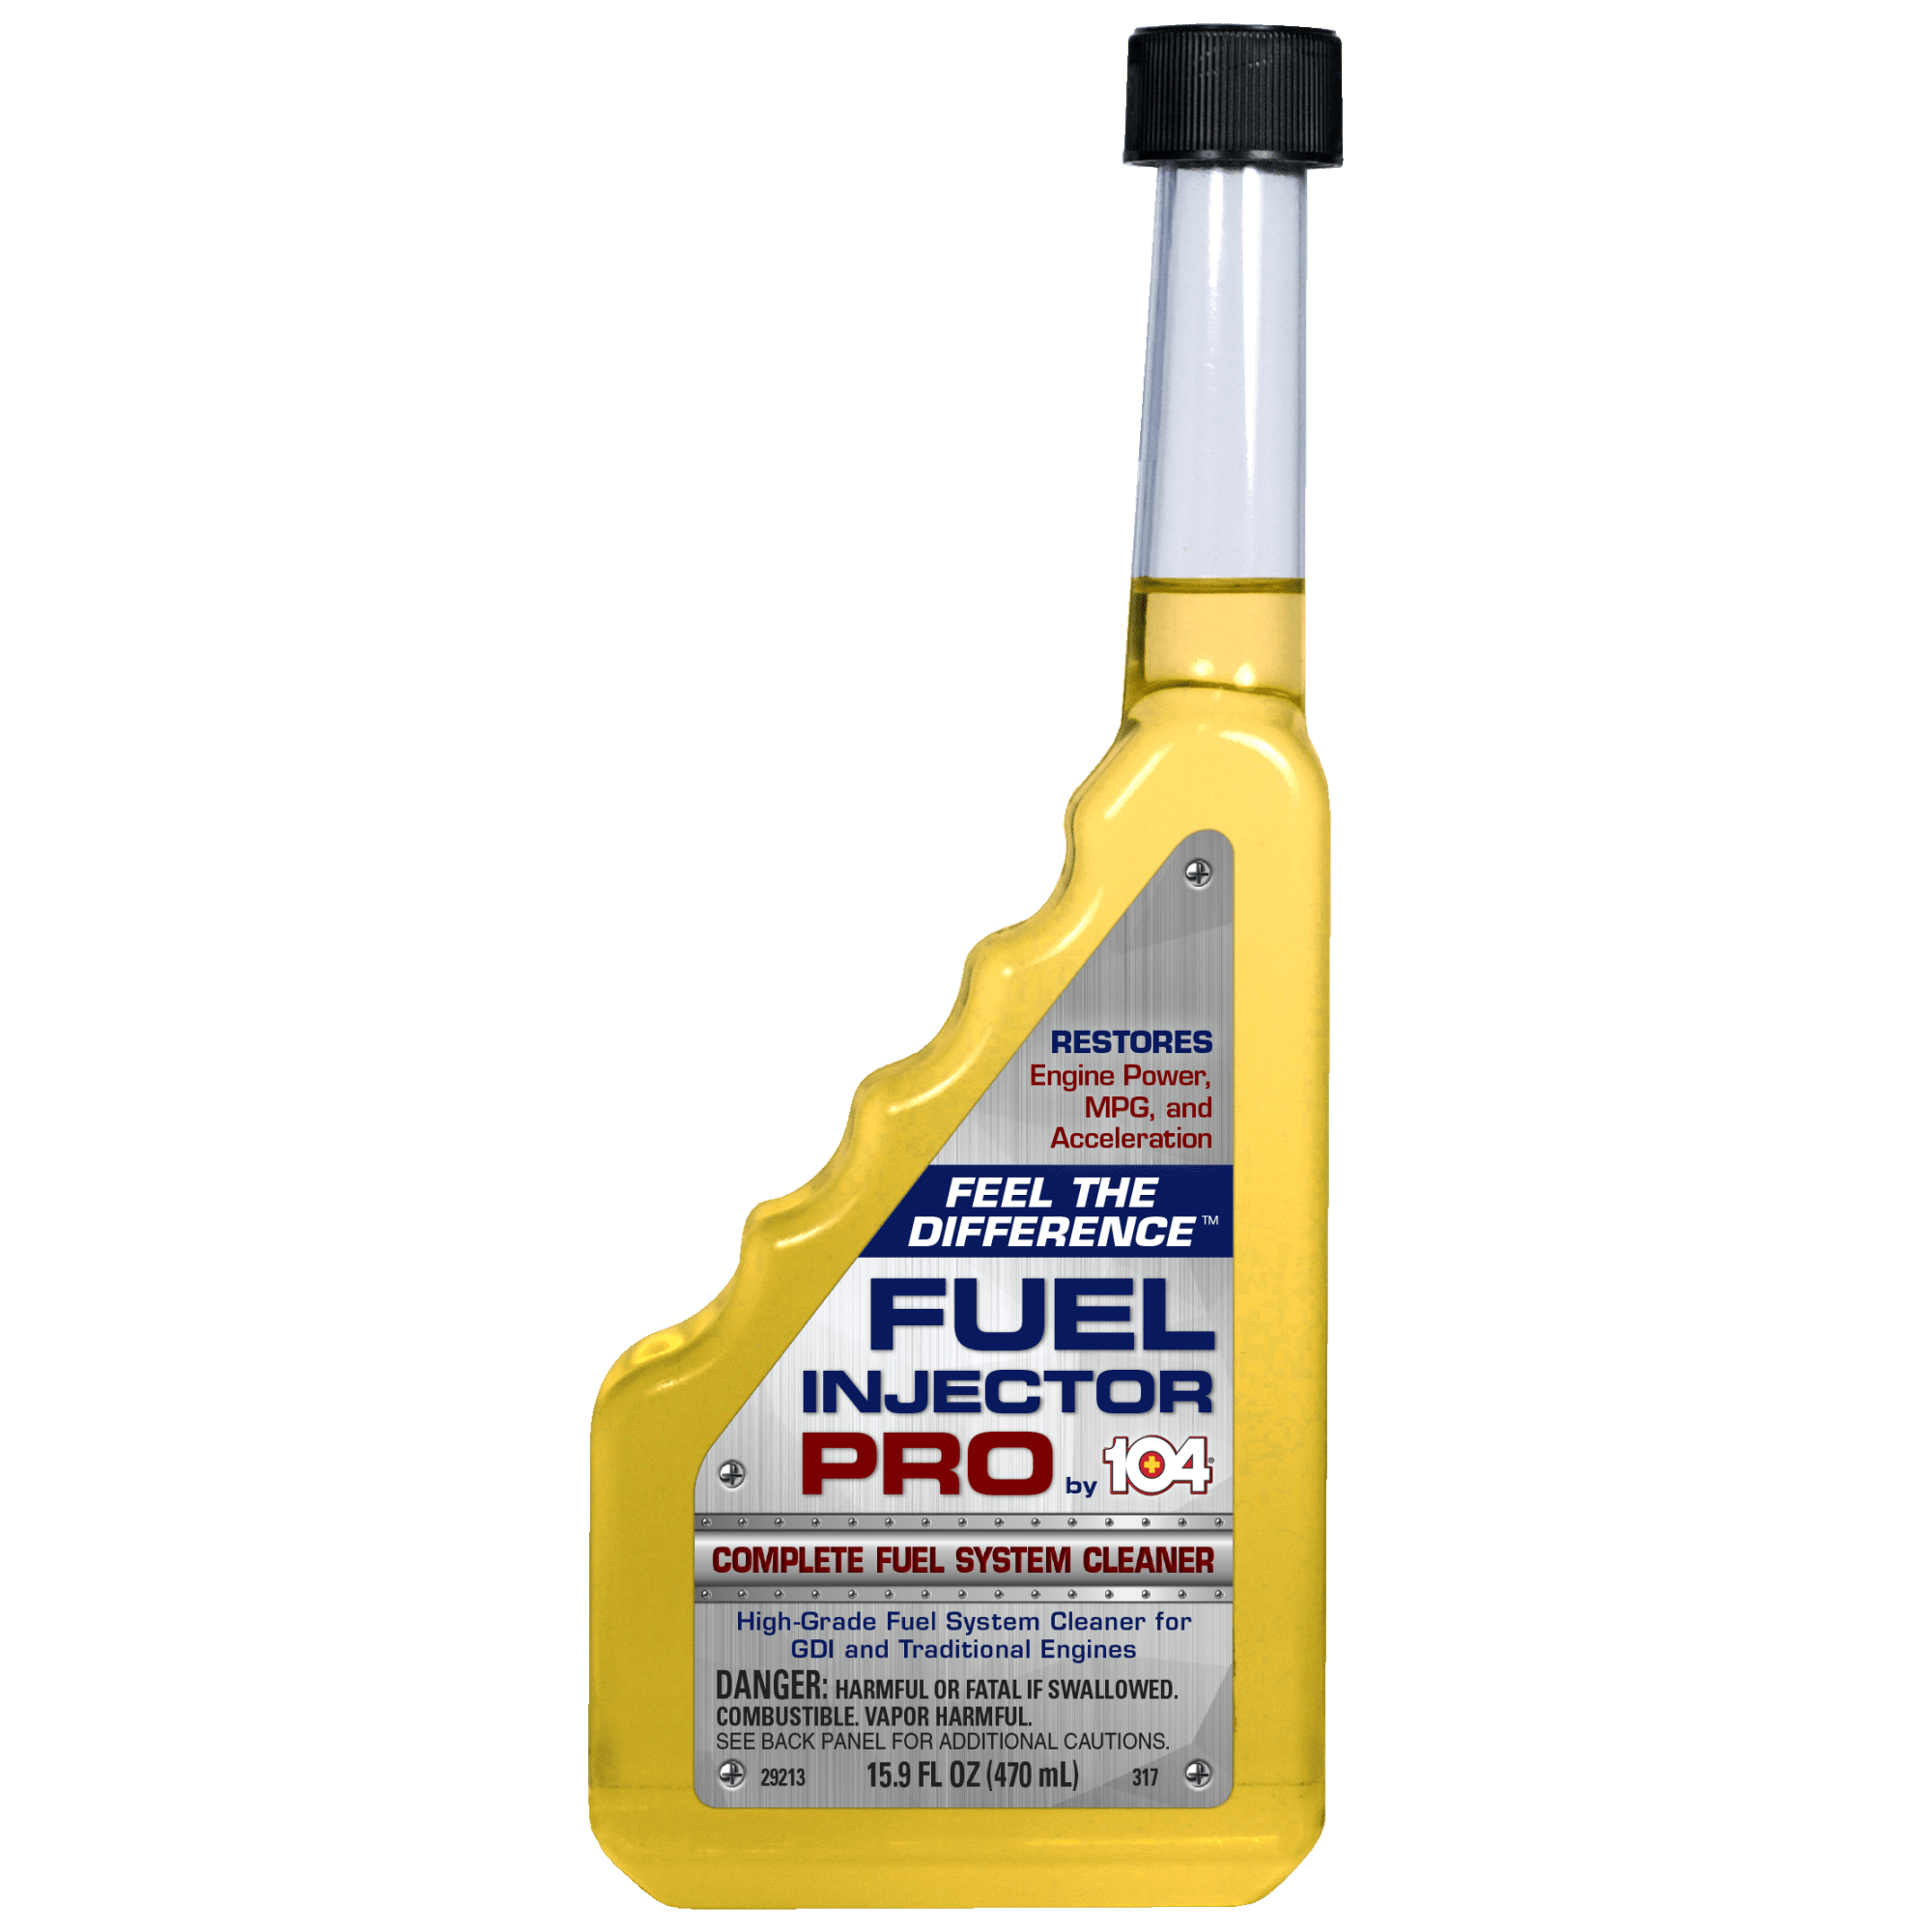 Bardahl Pro - Fuel Injector Cleaner